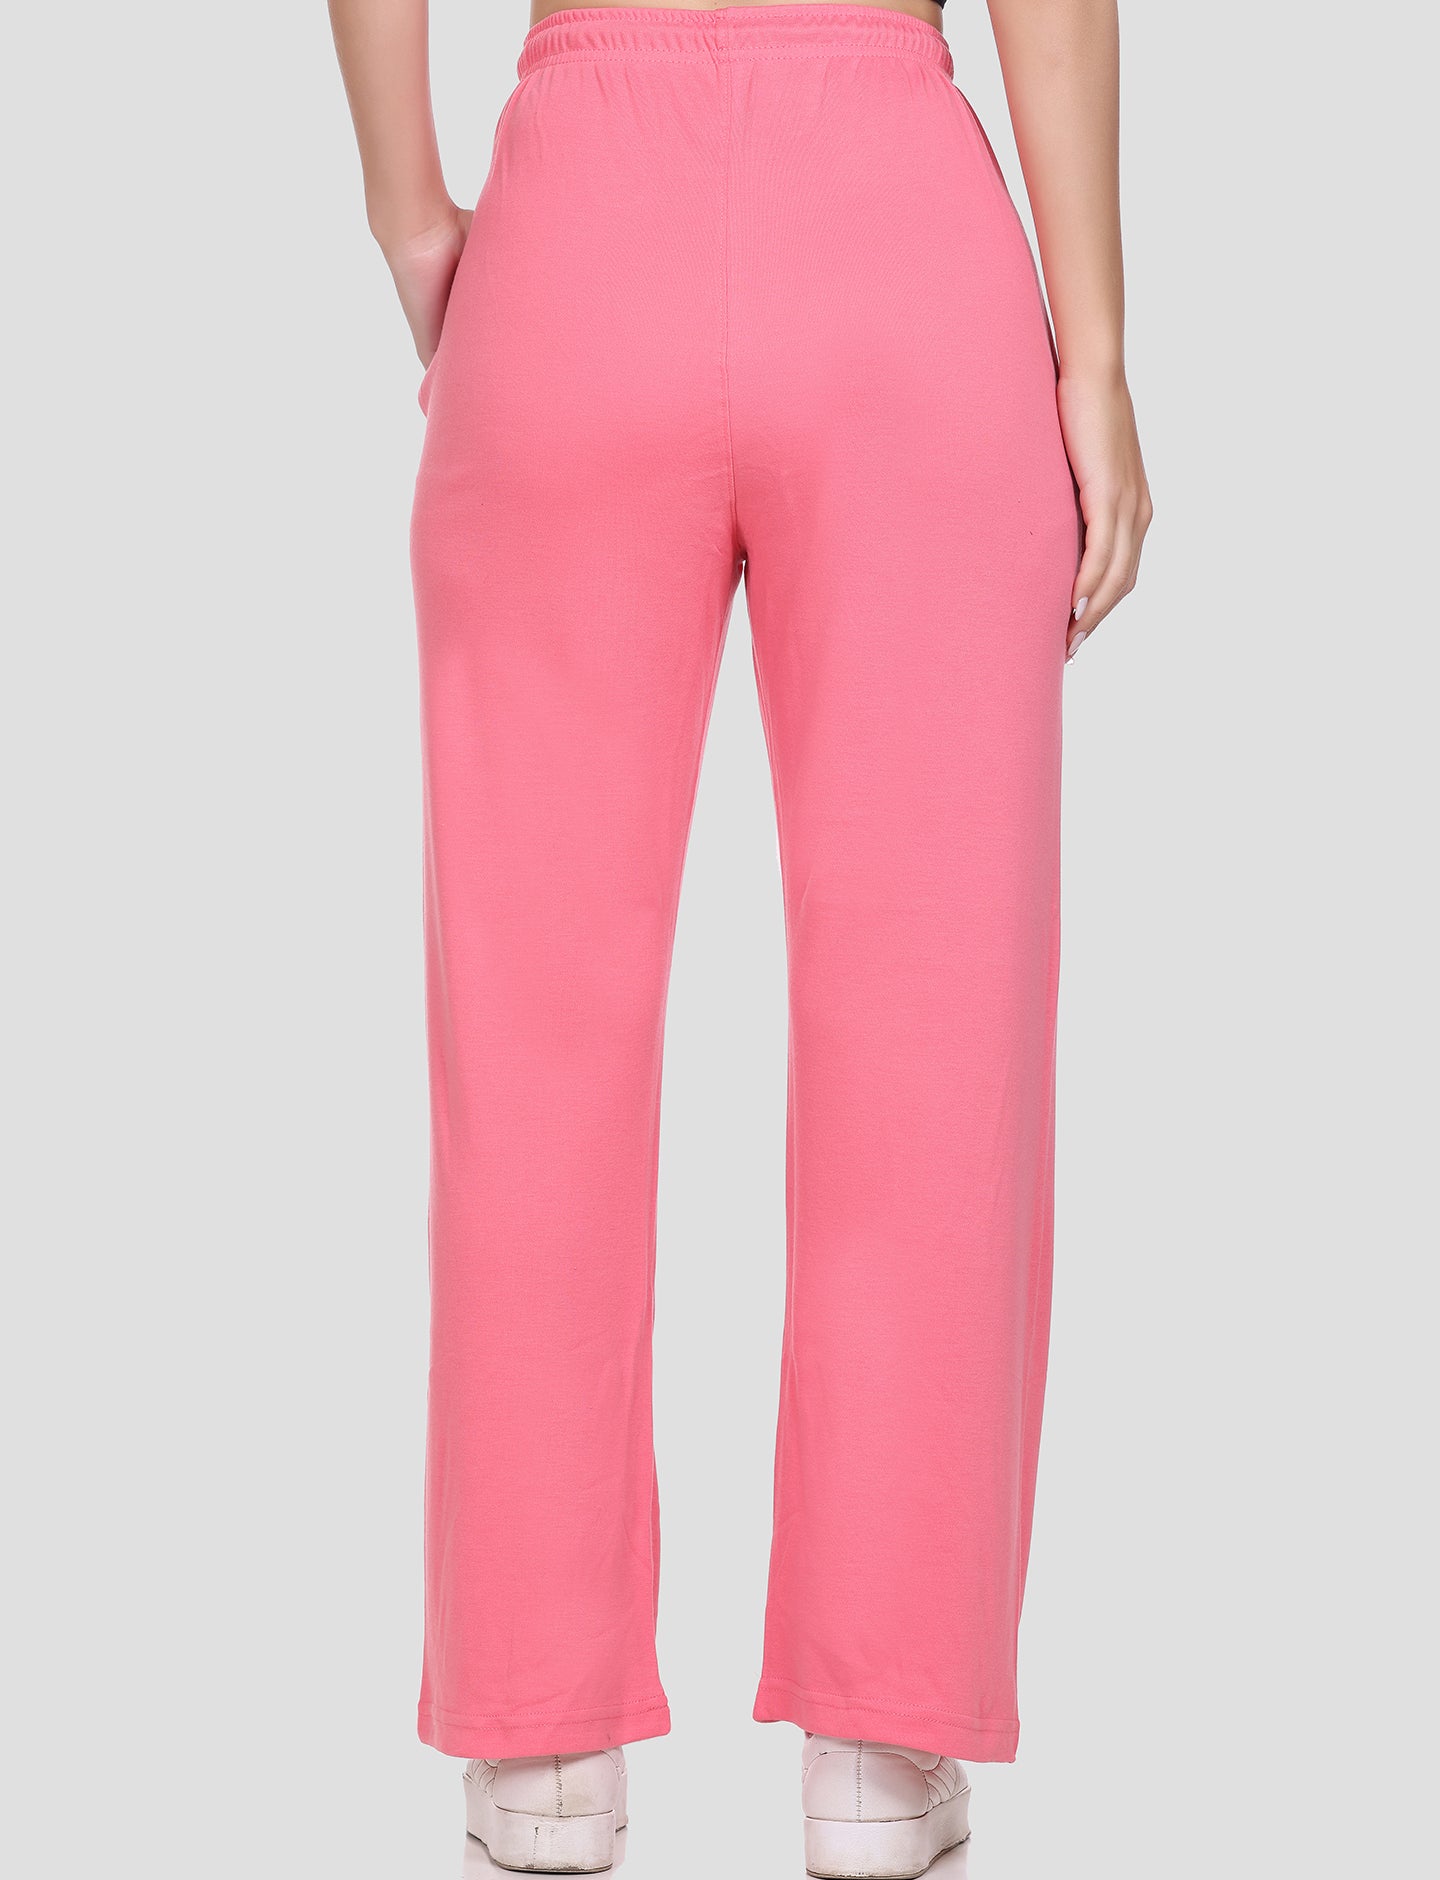 Comfortable High Waist Cotton Flared Pants For Women in Flare Pink online at best prices